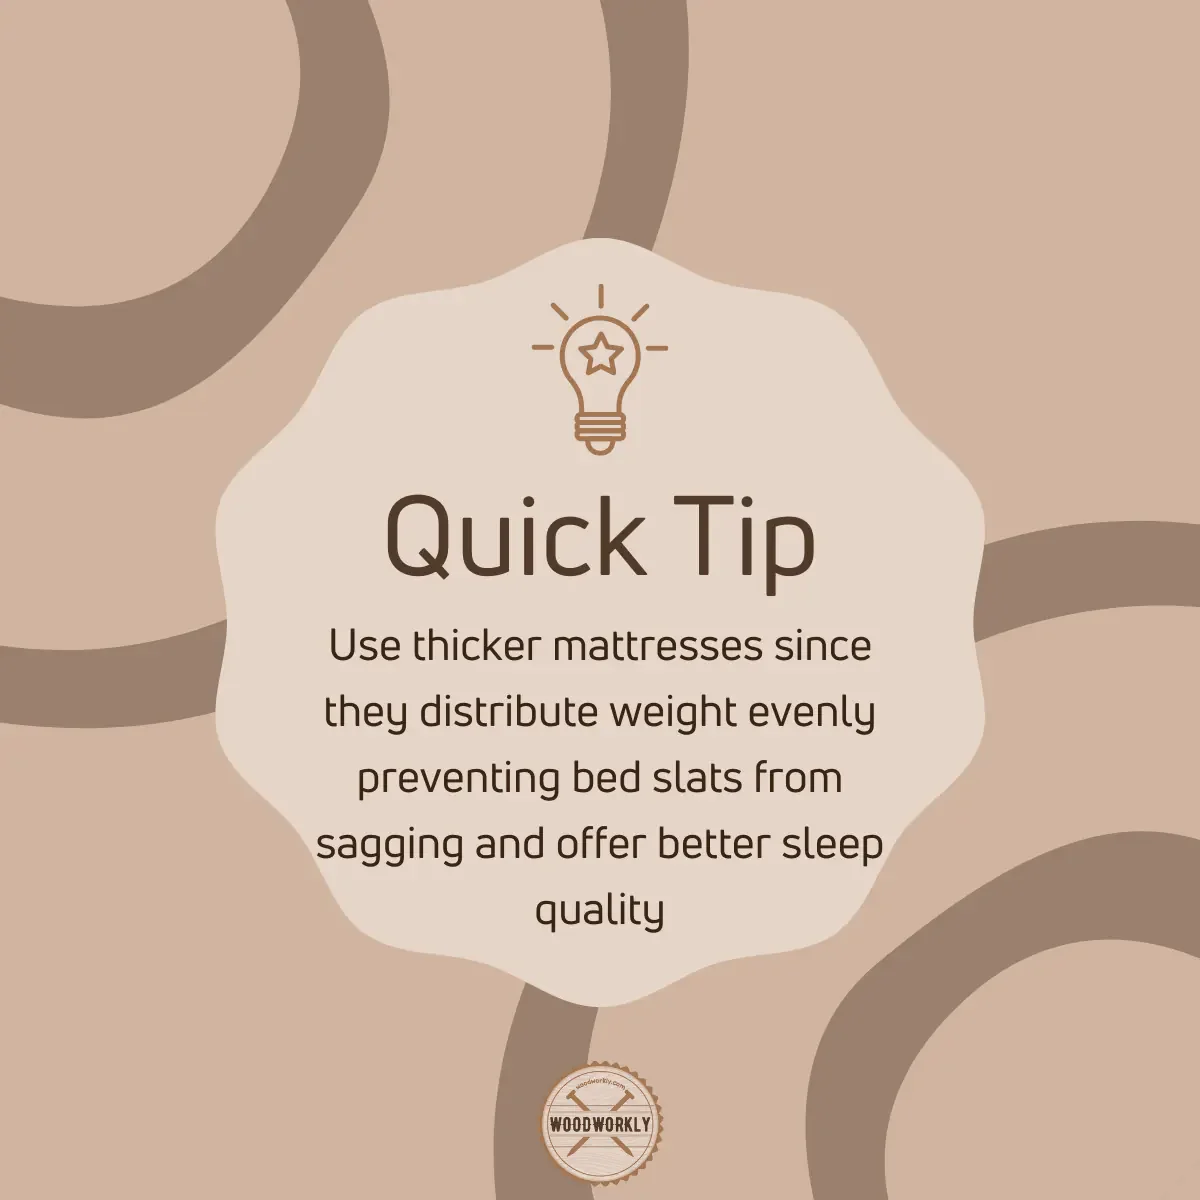 use thicker matteress when sleeping to prevent bed slats from sagging